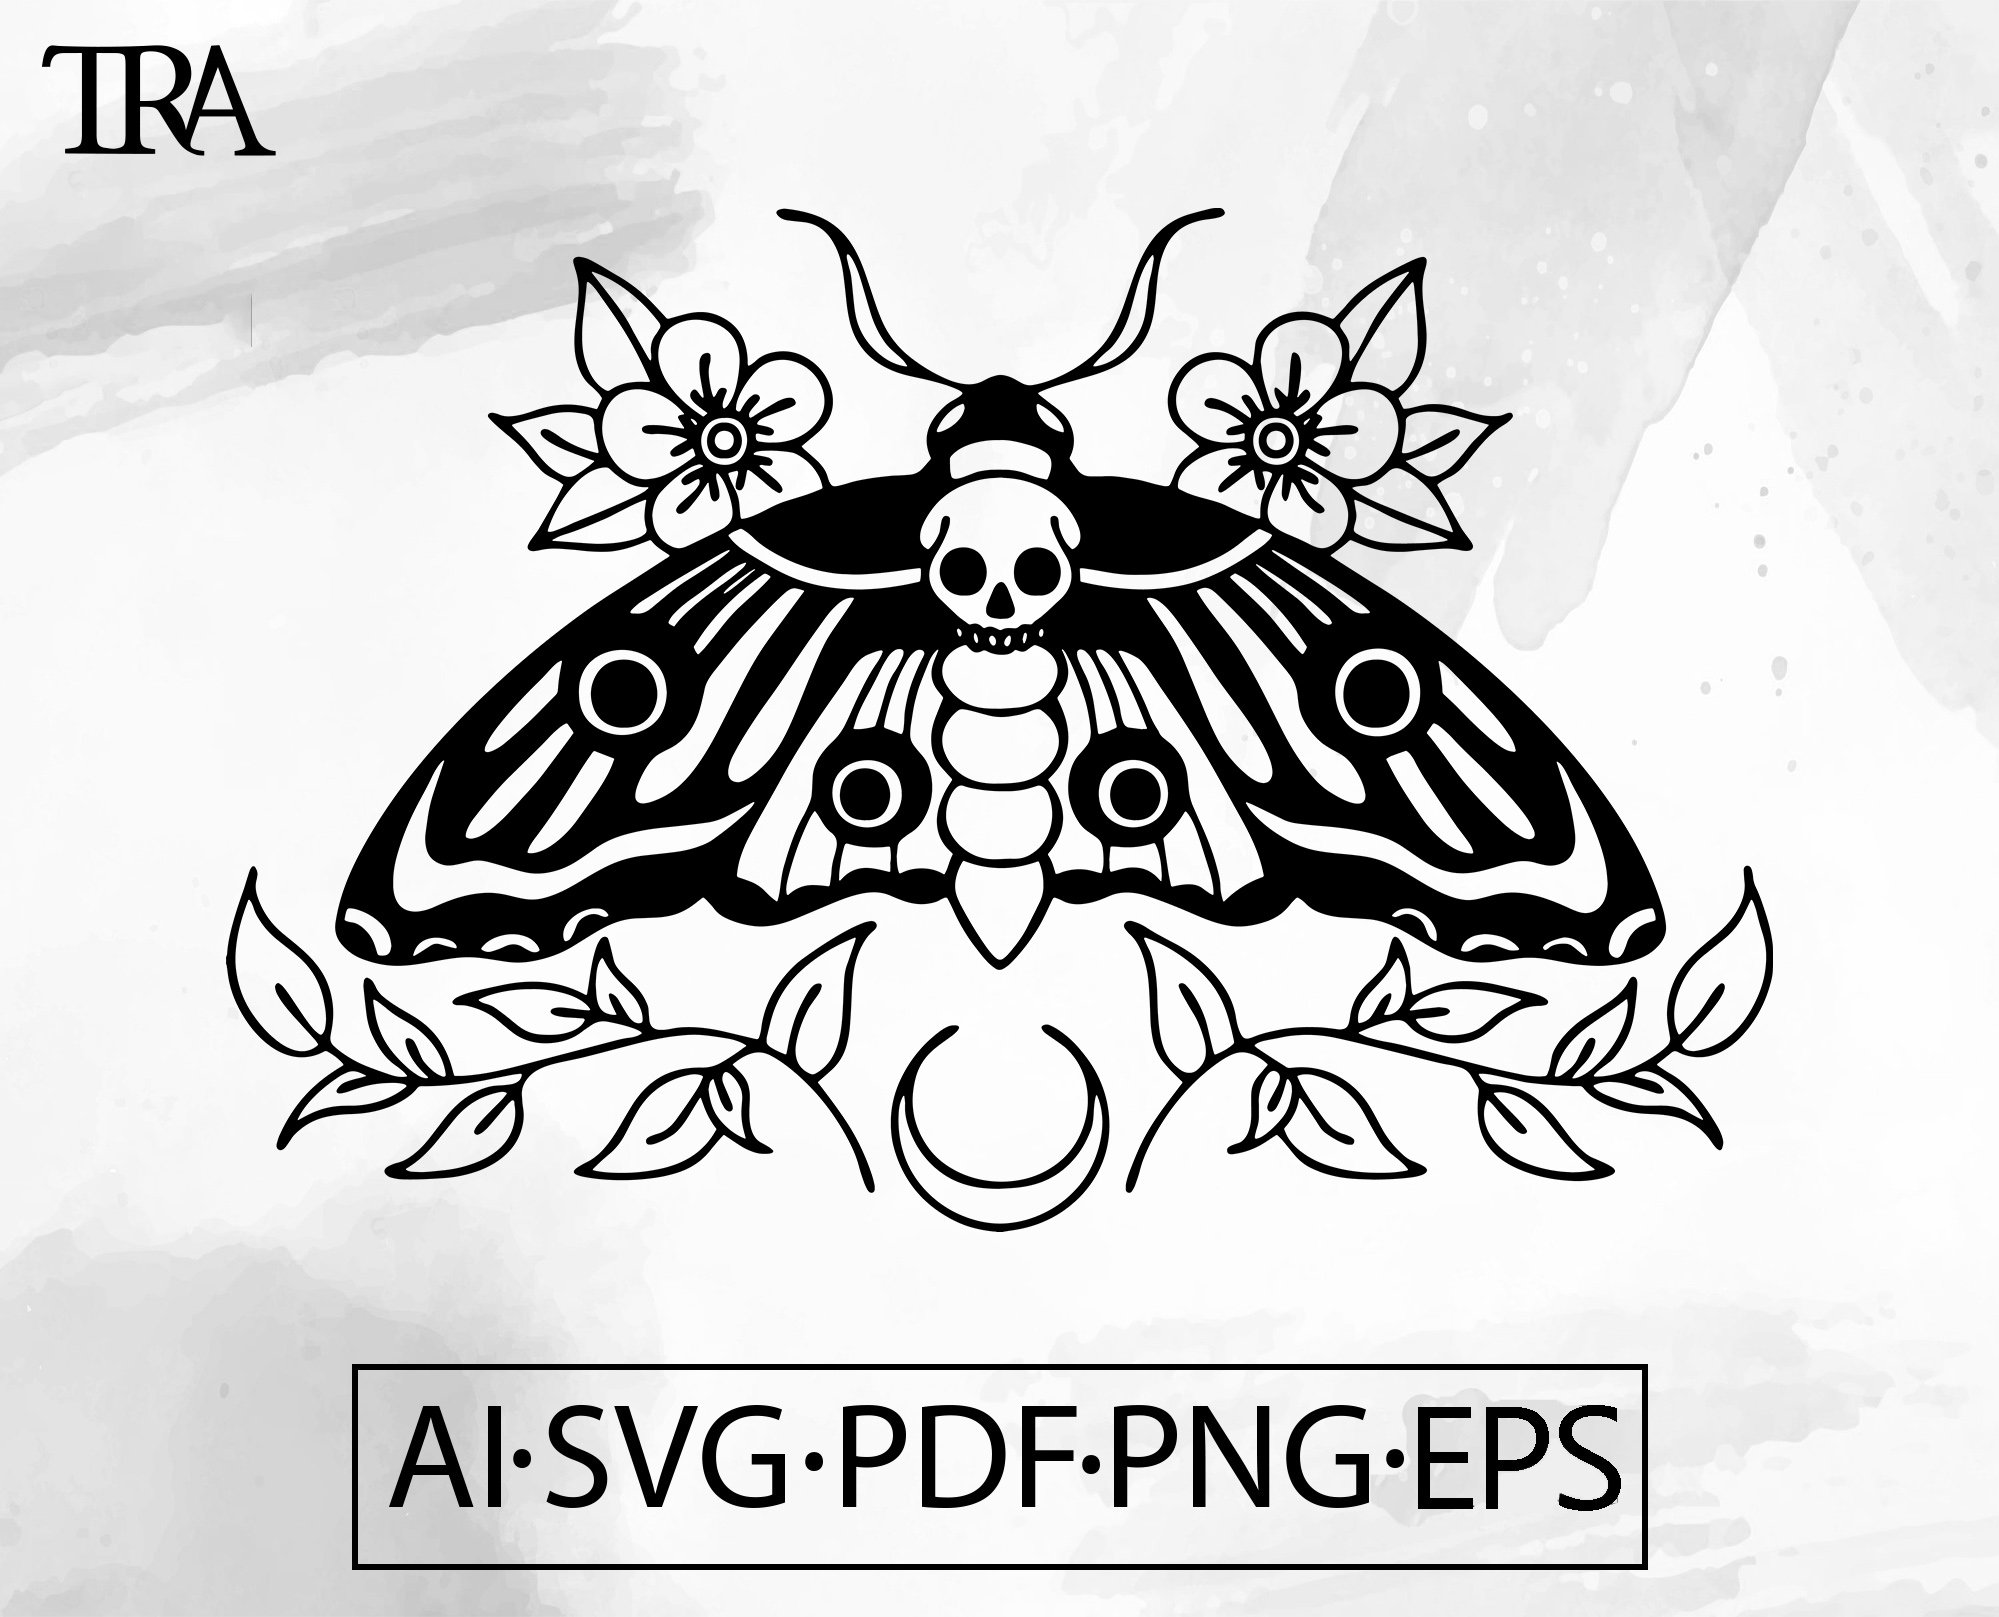 Ellie's Moth Tattoo SVG the Last of Us Part 2 Svg Dxf 